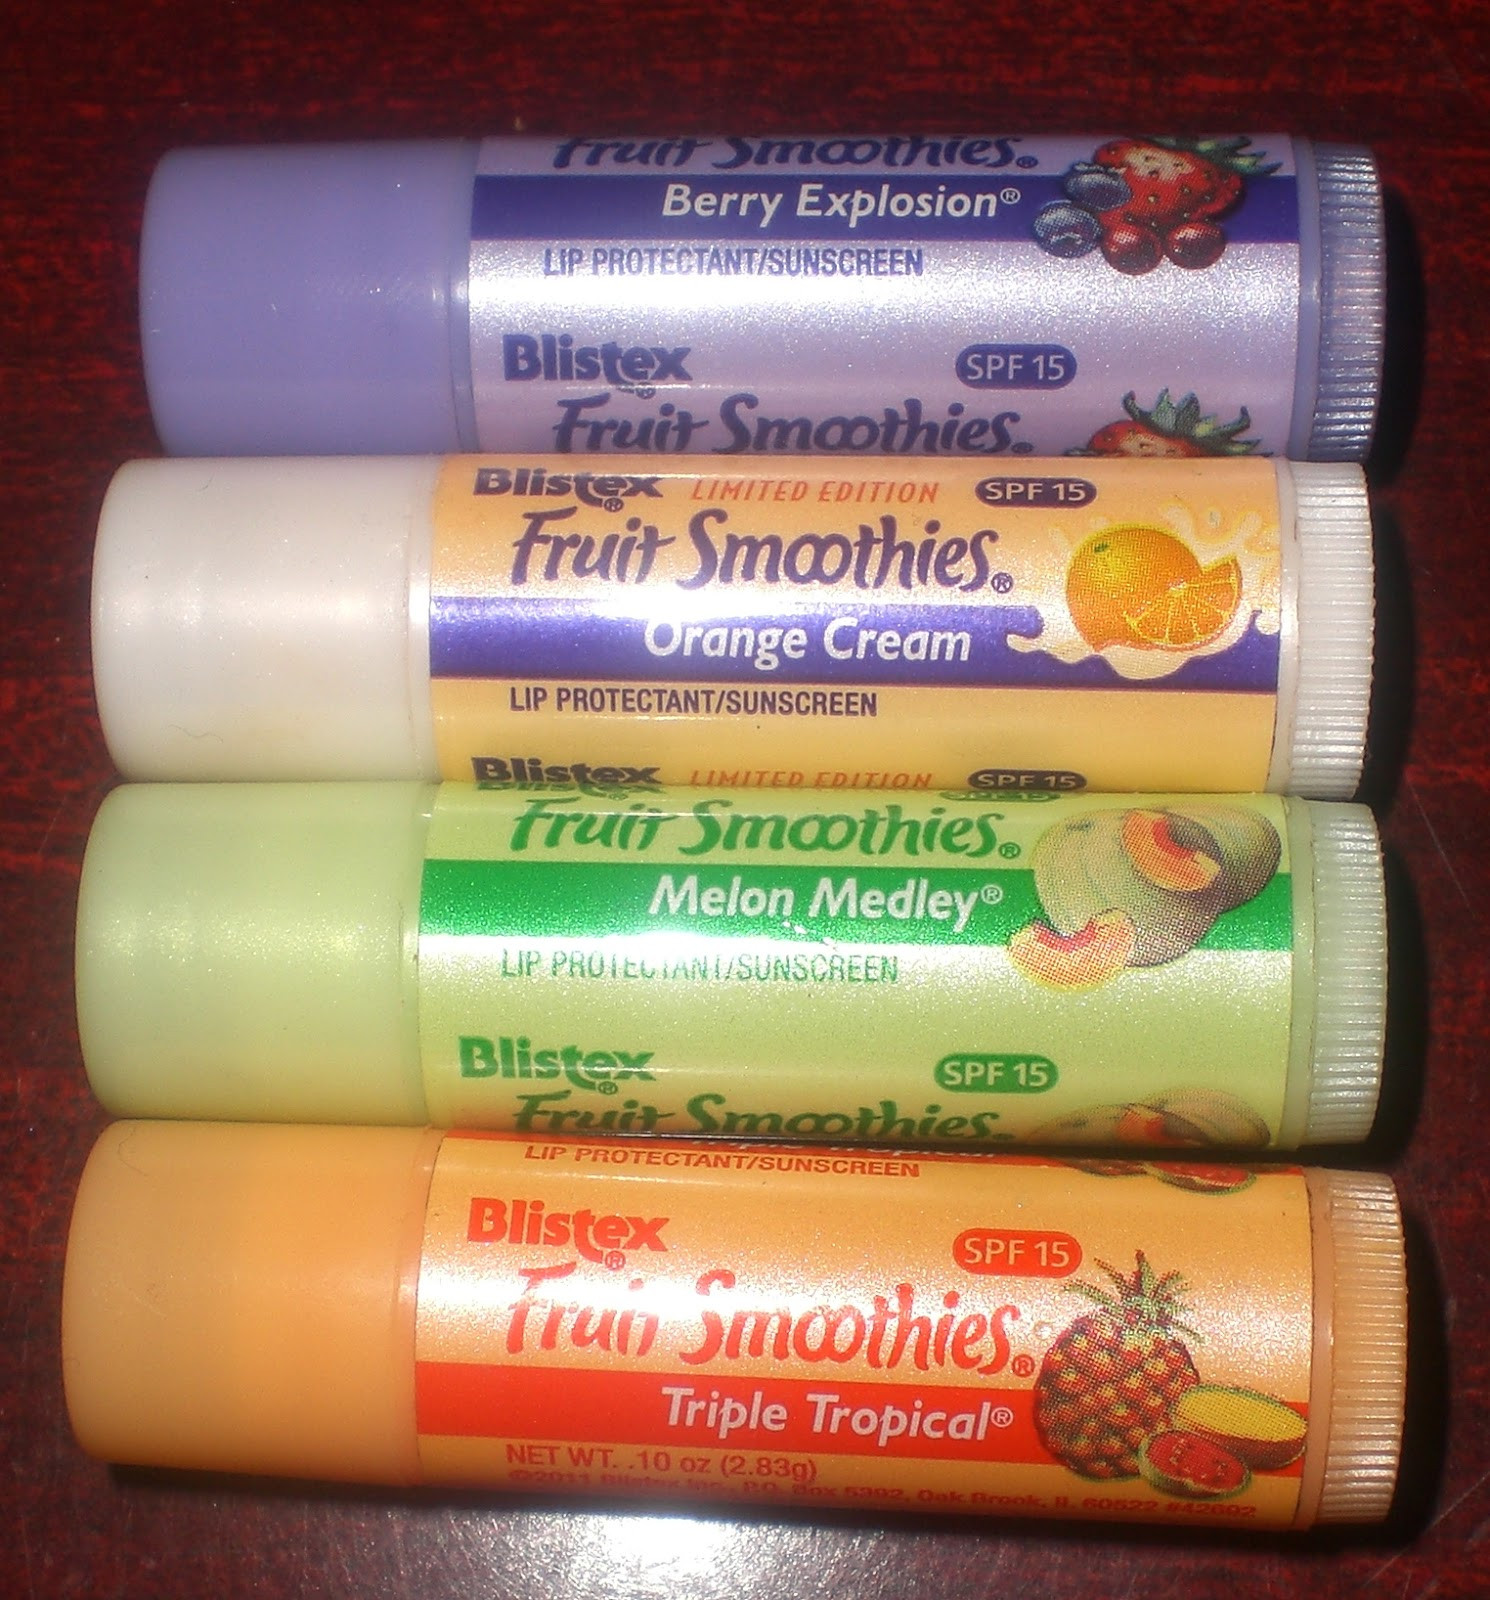 Blistex Fruit Smoothies
 Cotton Candy Fro Blistex Fruit Smoothies Lip Balm